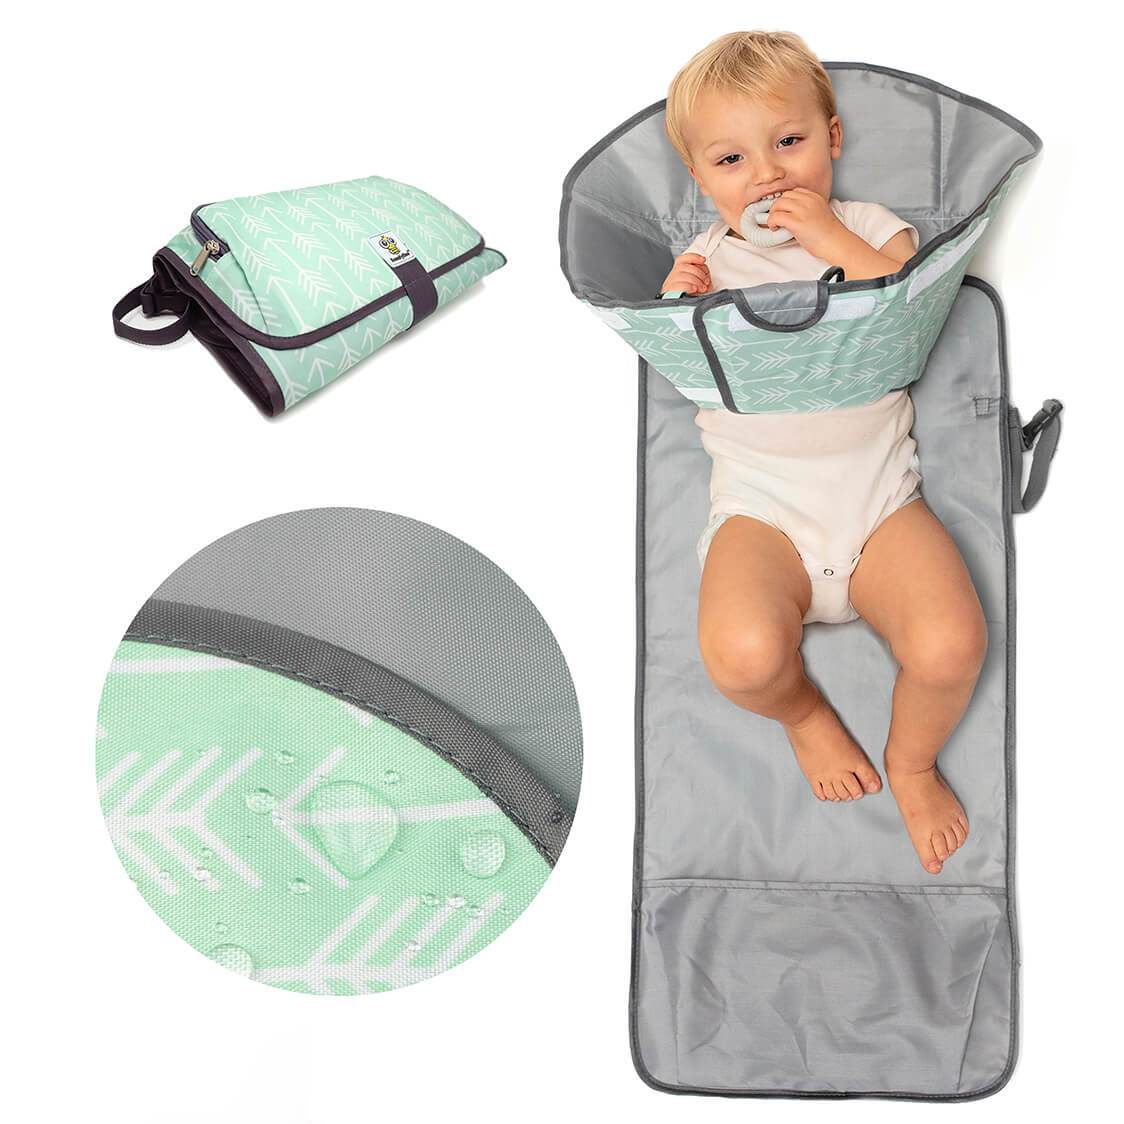 SnoofyBee Changing Pad, $35.99